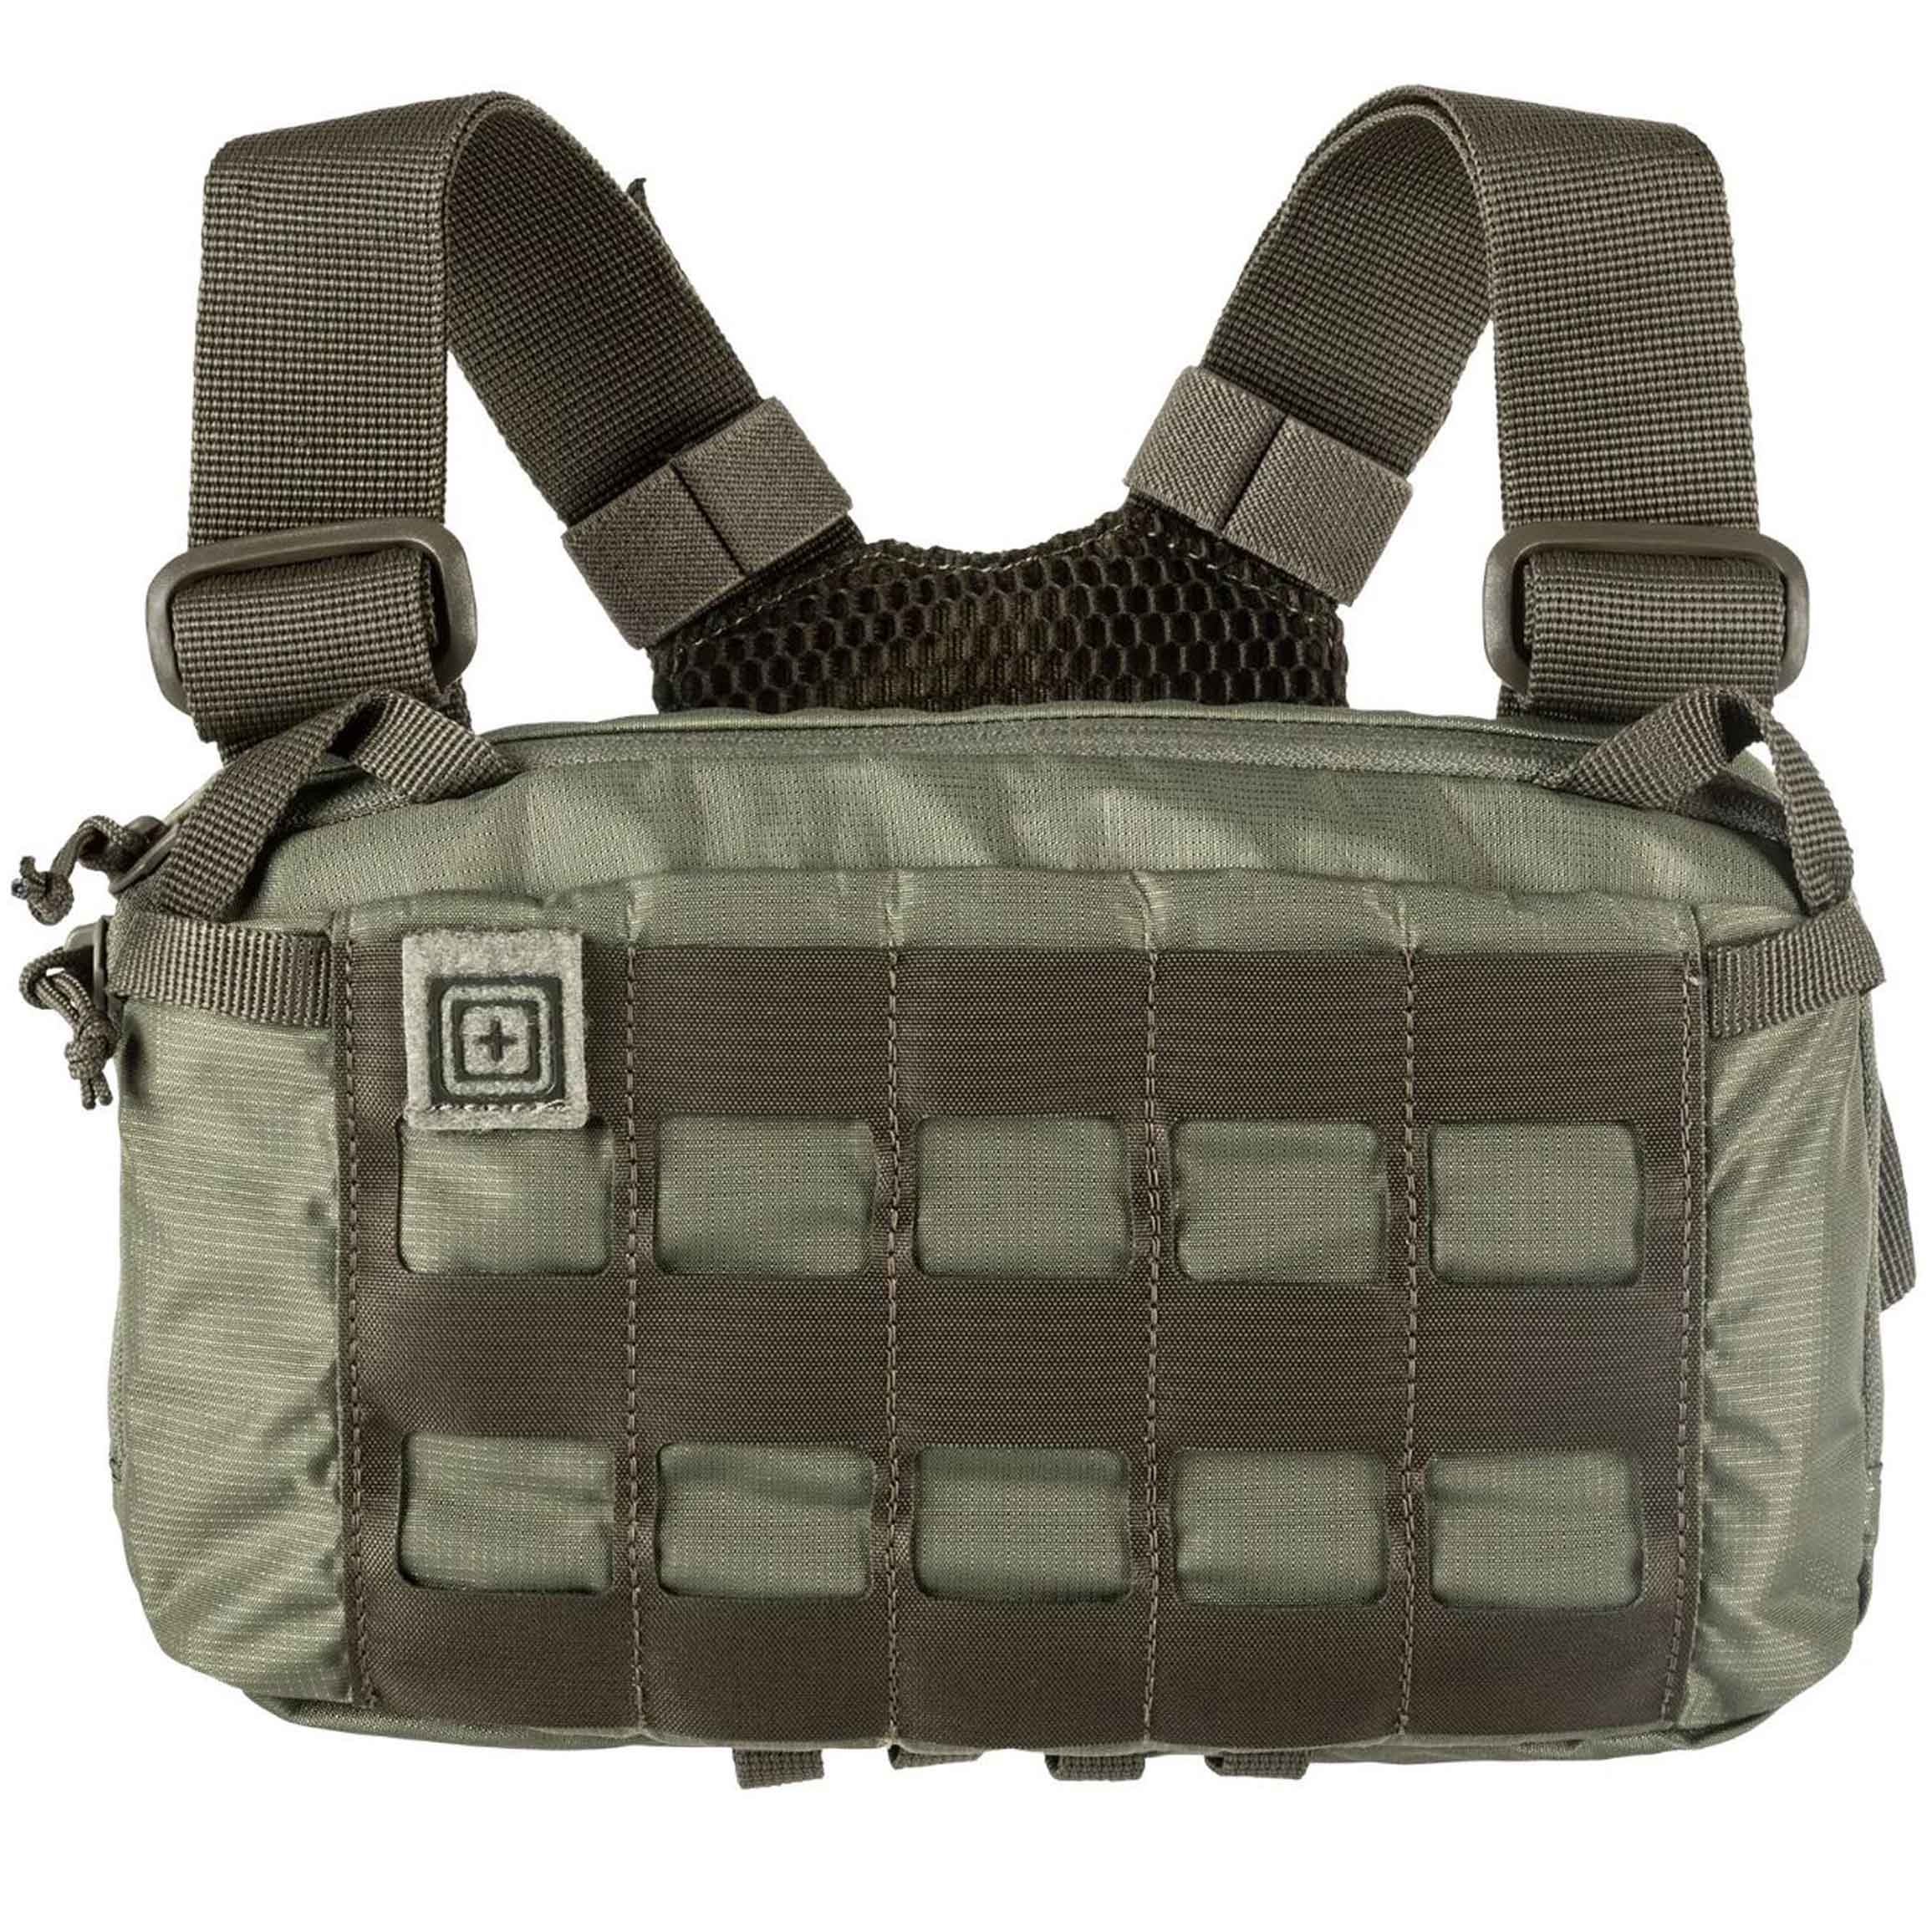 Torba 5.11 Skyweight Survival Chest Pack - Sage Green